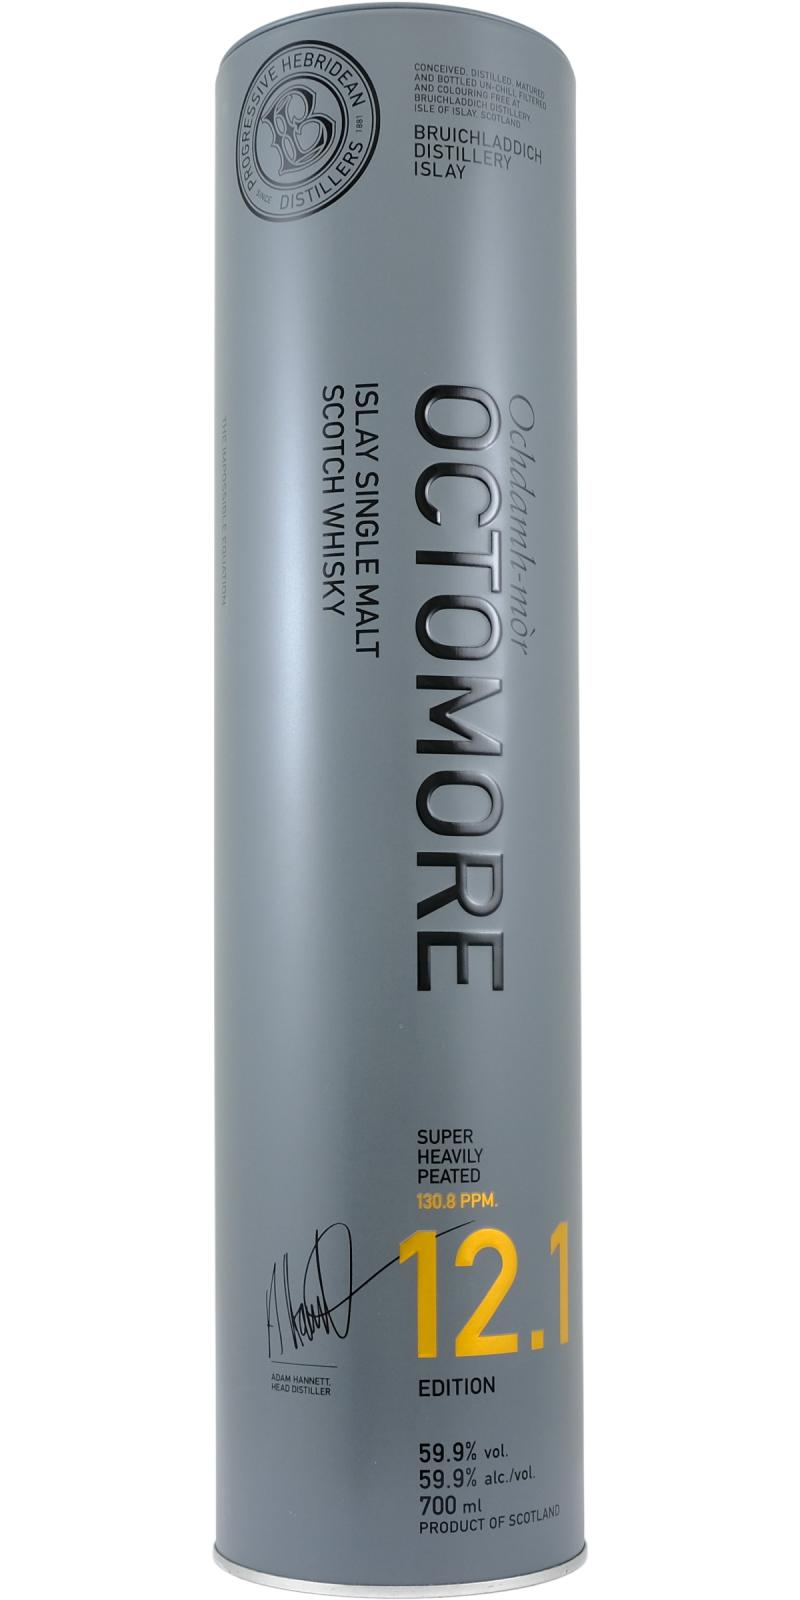 Octomore Edition 12.1 / 130.8 PPM